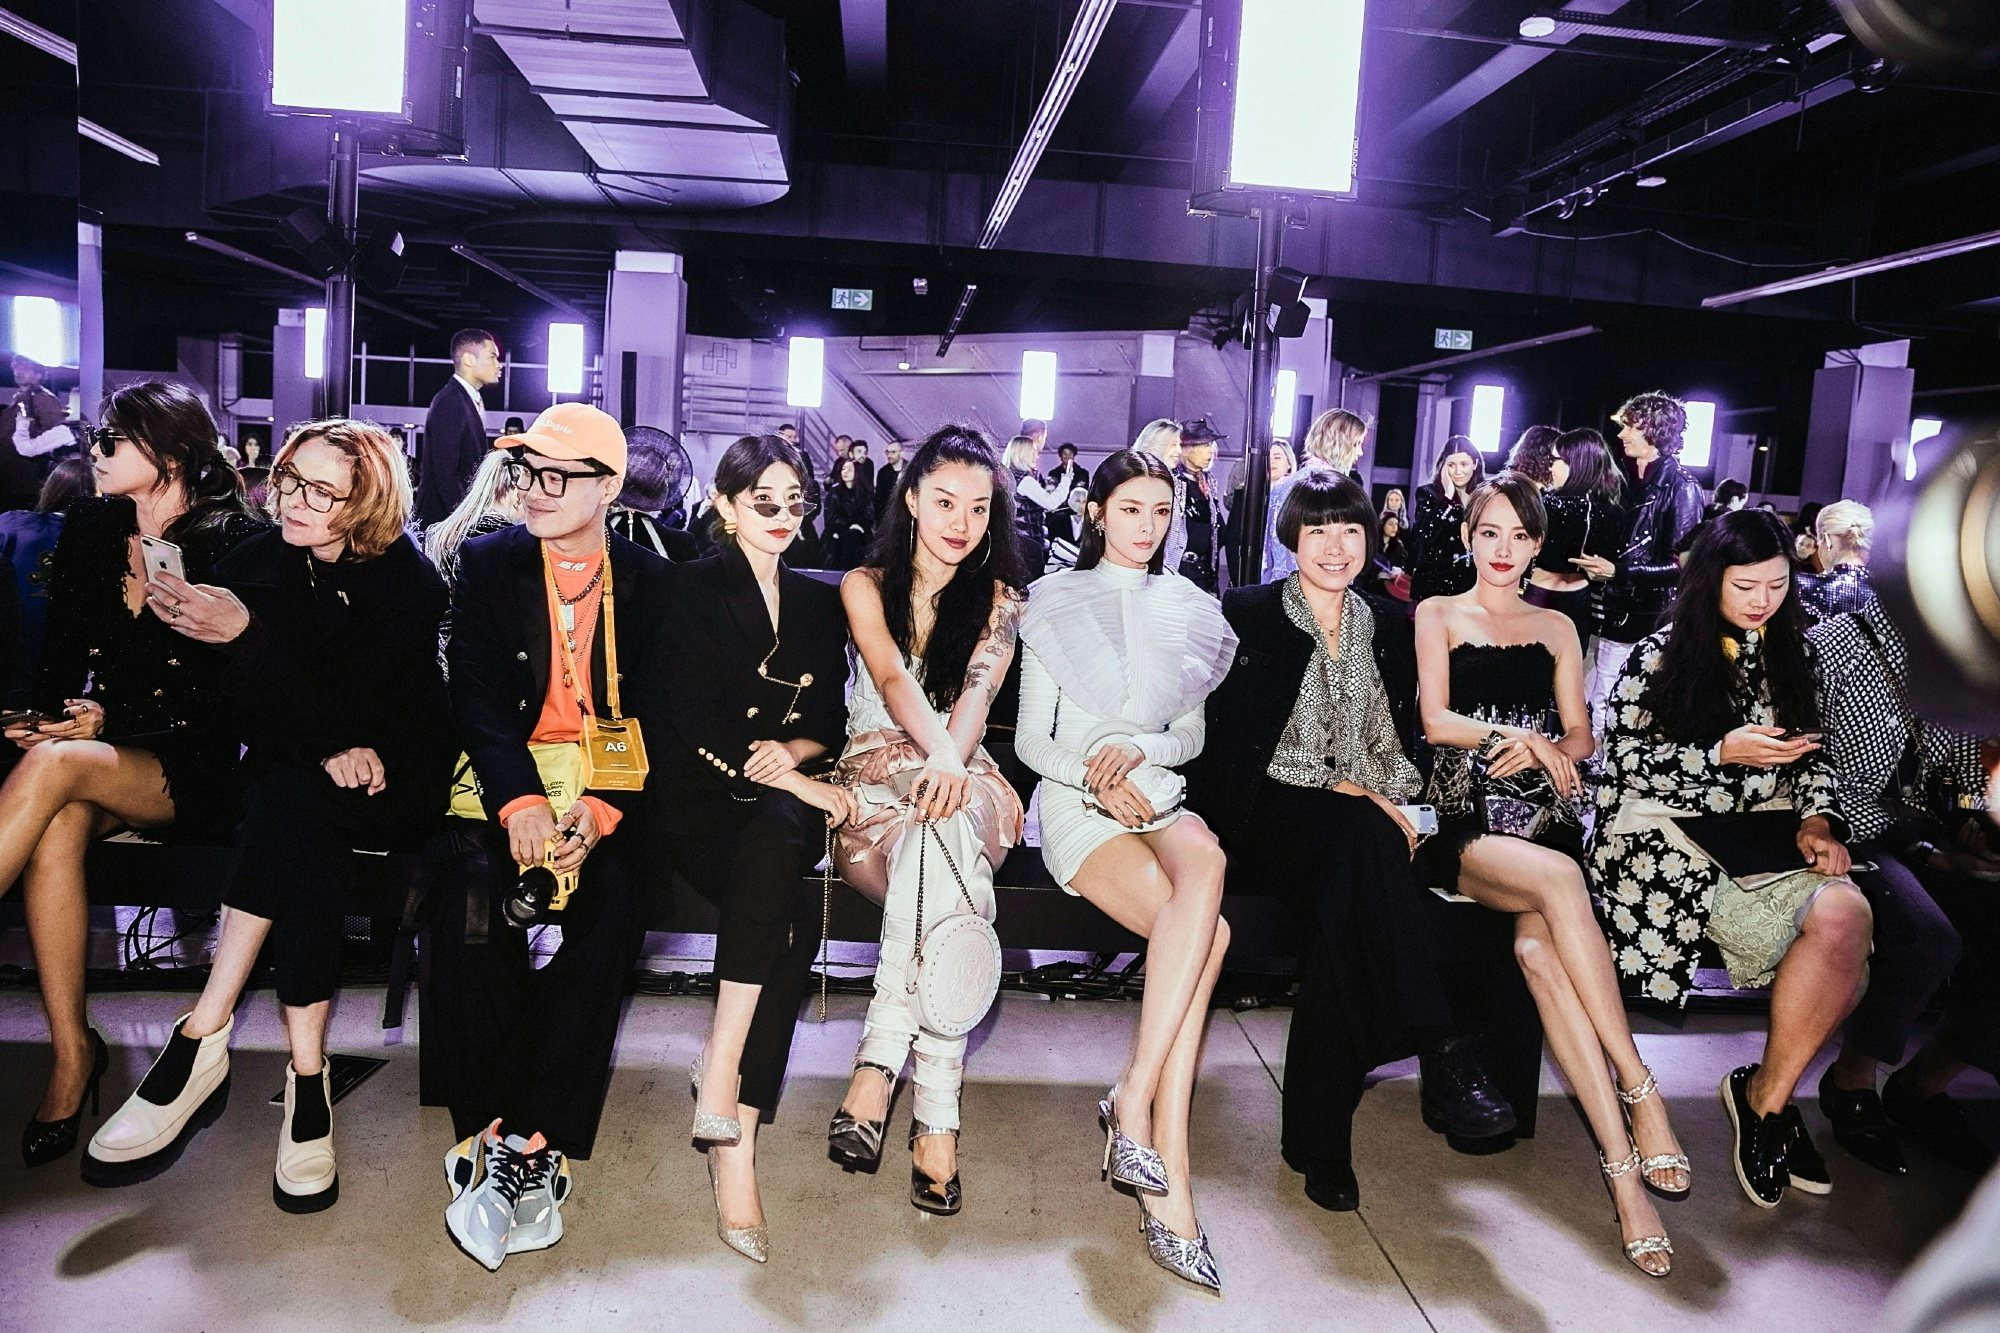 Chinese celebrities and influencers rubbing shoulders with editors on the runway front row has become a common scene during fashion weeks. Photo: Weibo